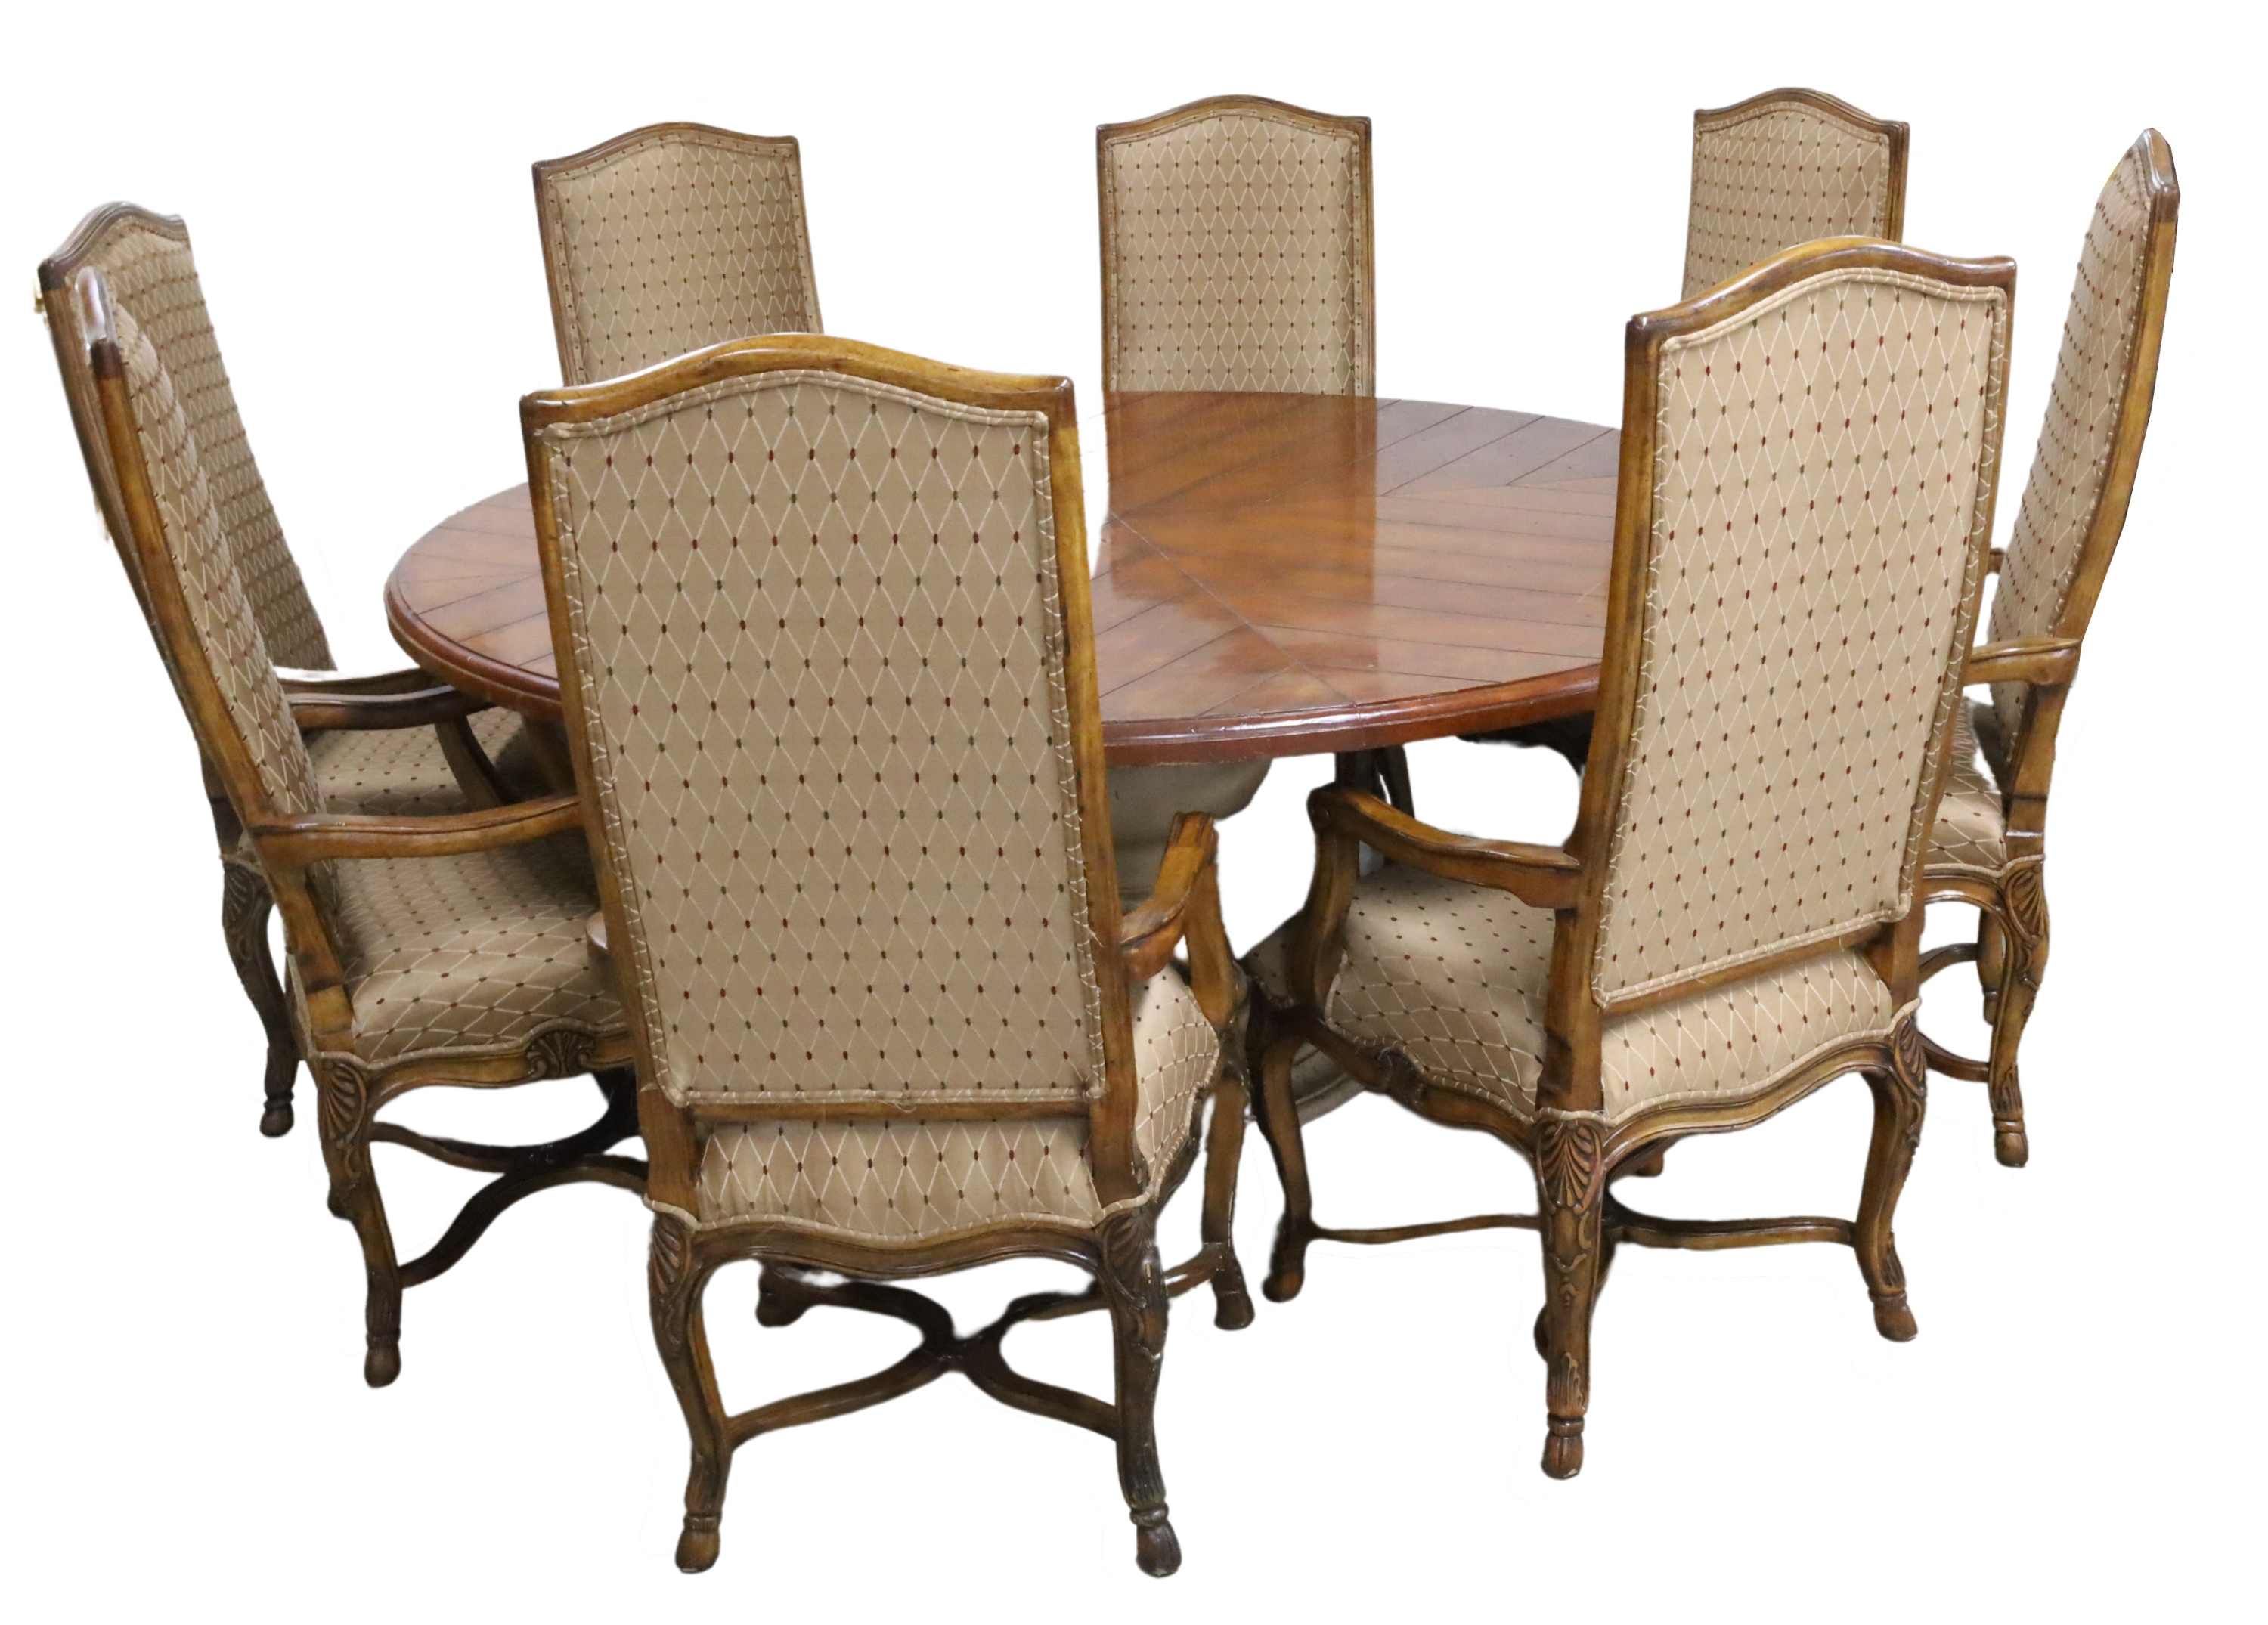 ROUND DINING TABLE 8 CHAIRS Contemporary 2f91ef